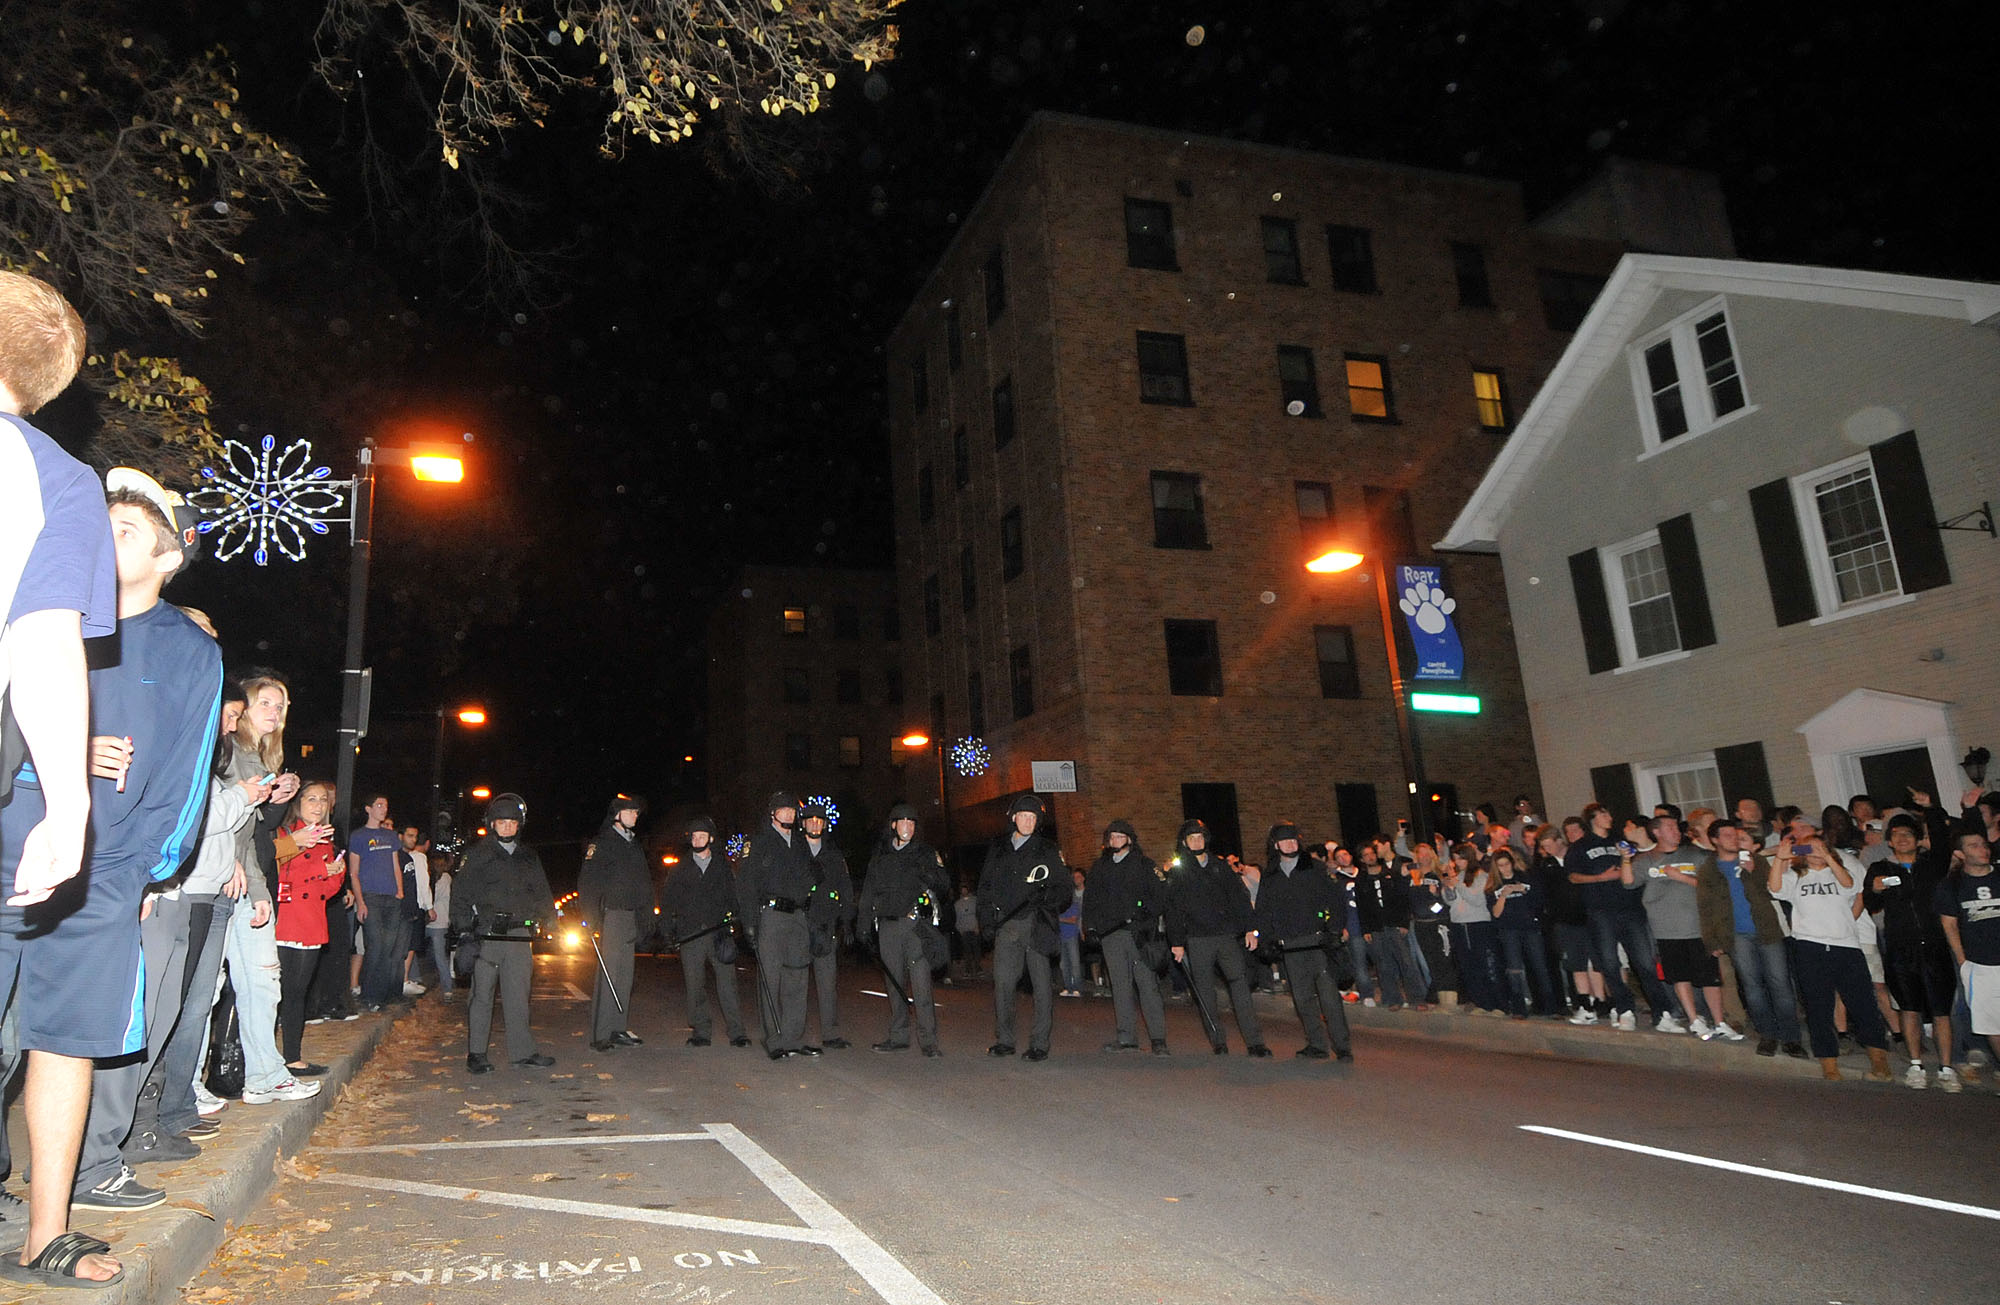  Policemen line the street of Beaver Avenue on Tuesday night to keep back protesters. They asked for students to clear the street, though many remained on the sidewalk chanting "USA," "Joe-pa-terno," and "We Are." 